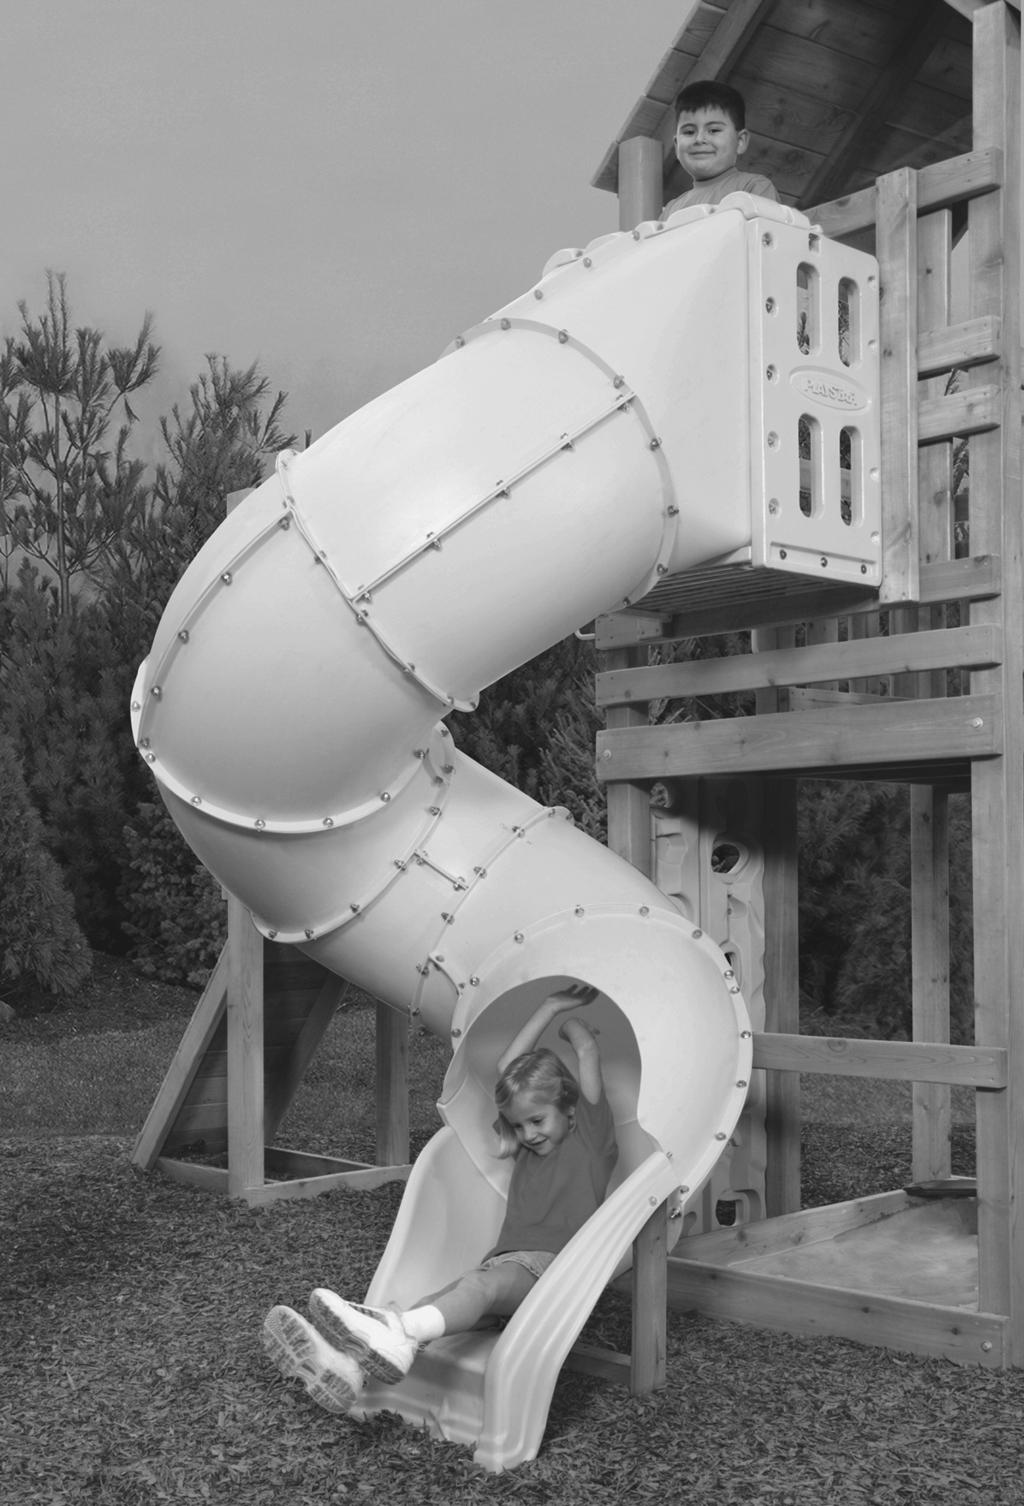 Play Action Spiral Tube Slide Assembly Instructions Important! Intended for residential use by children ages 2 to 10, only on properly installed PlayStar playsets.